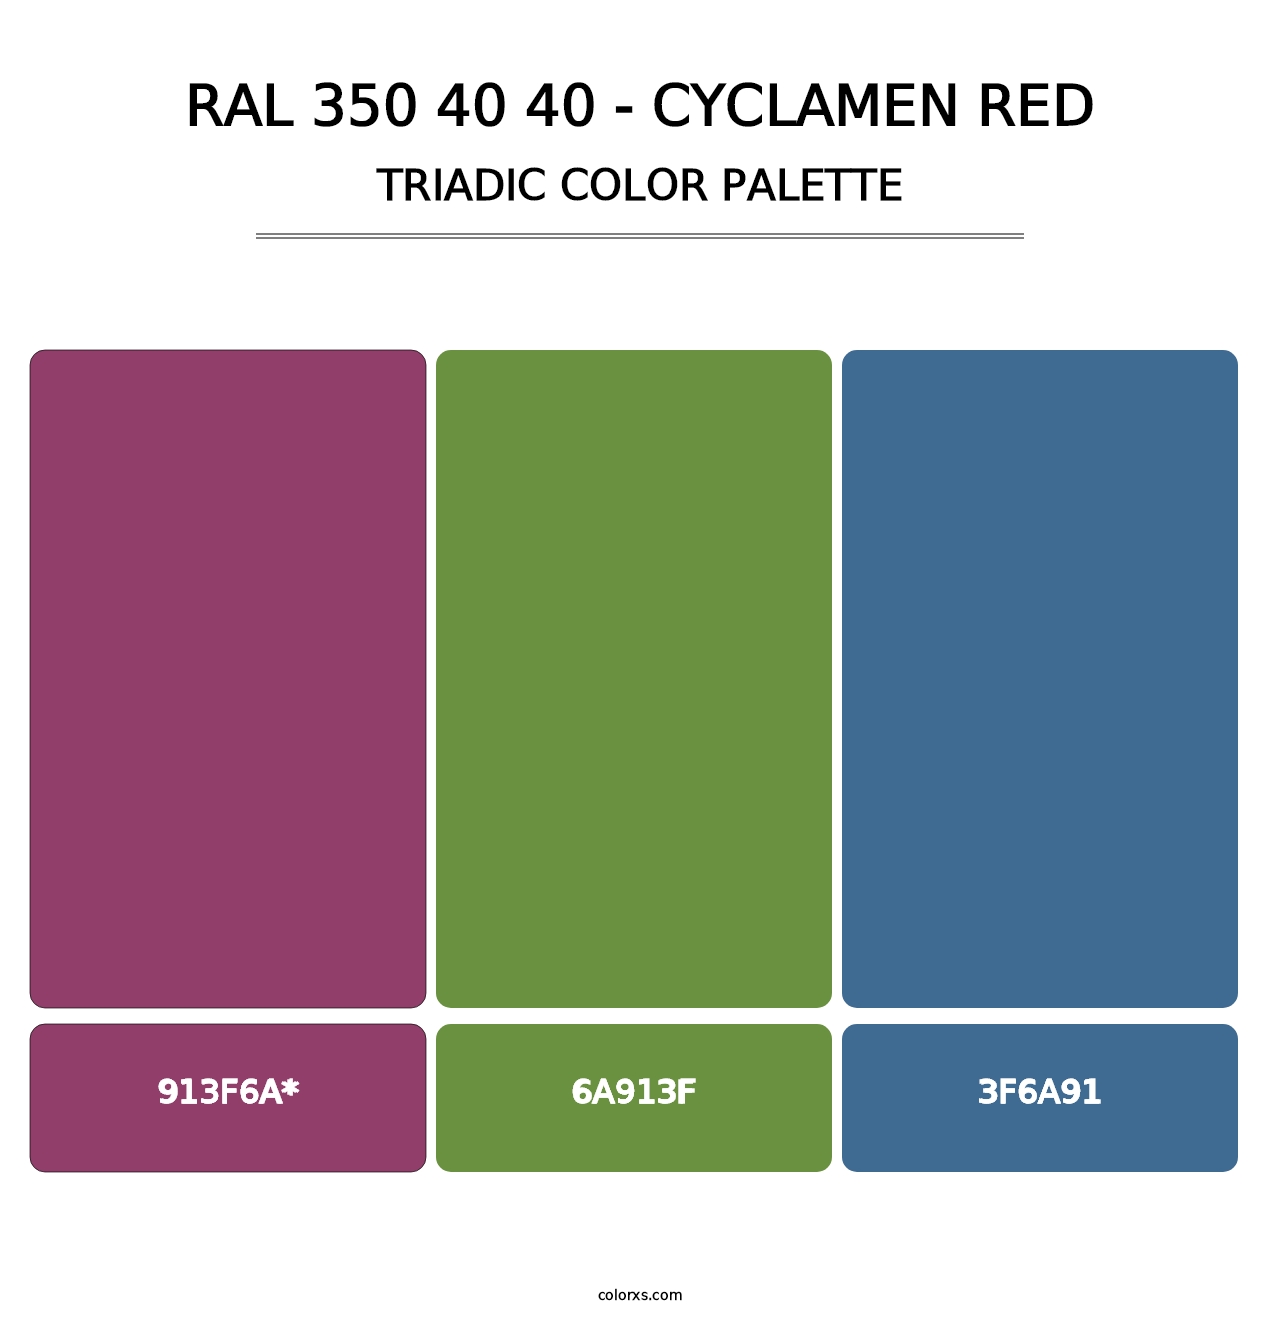 RAL 350 40 40 - Cyclamen Red - Triadic Color Palette